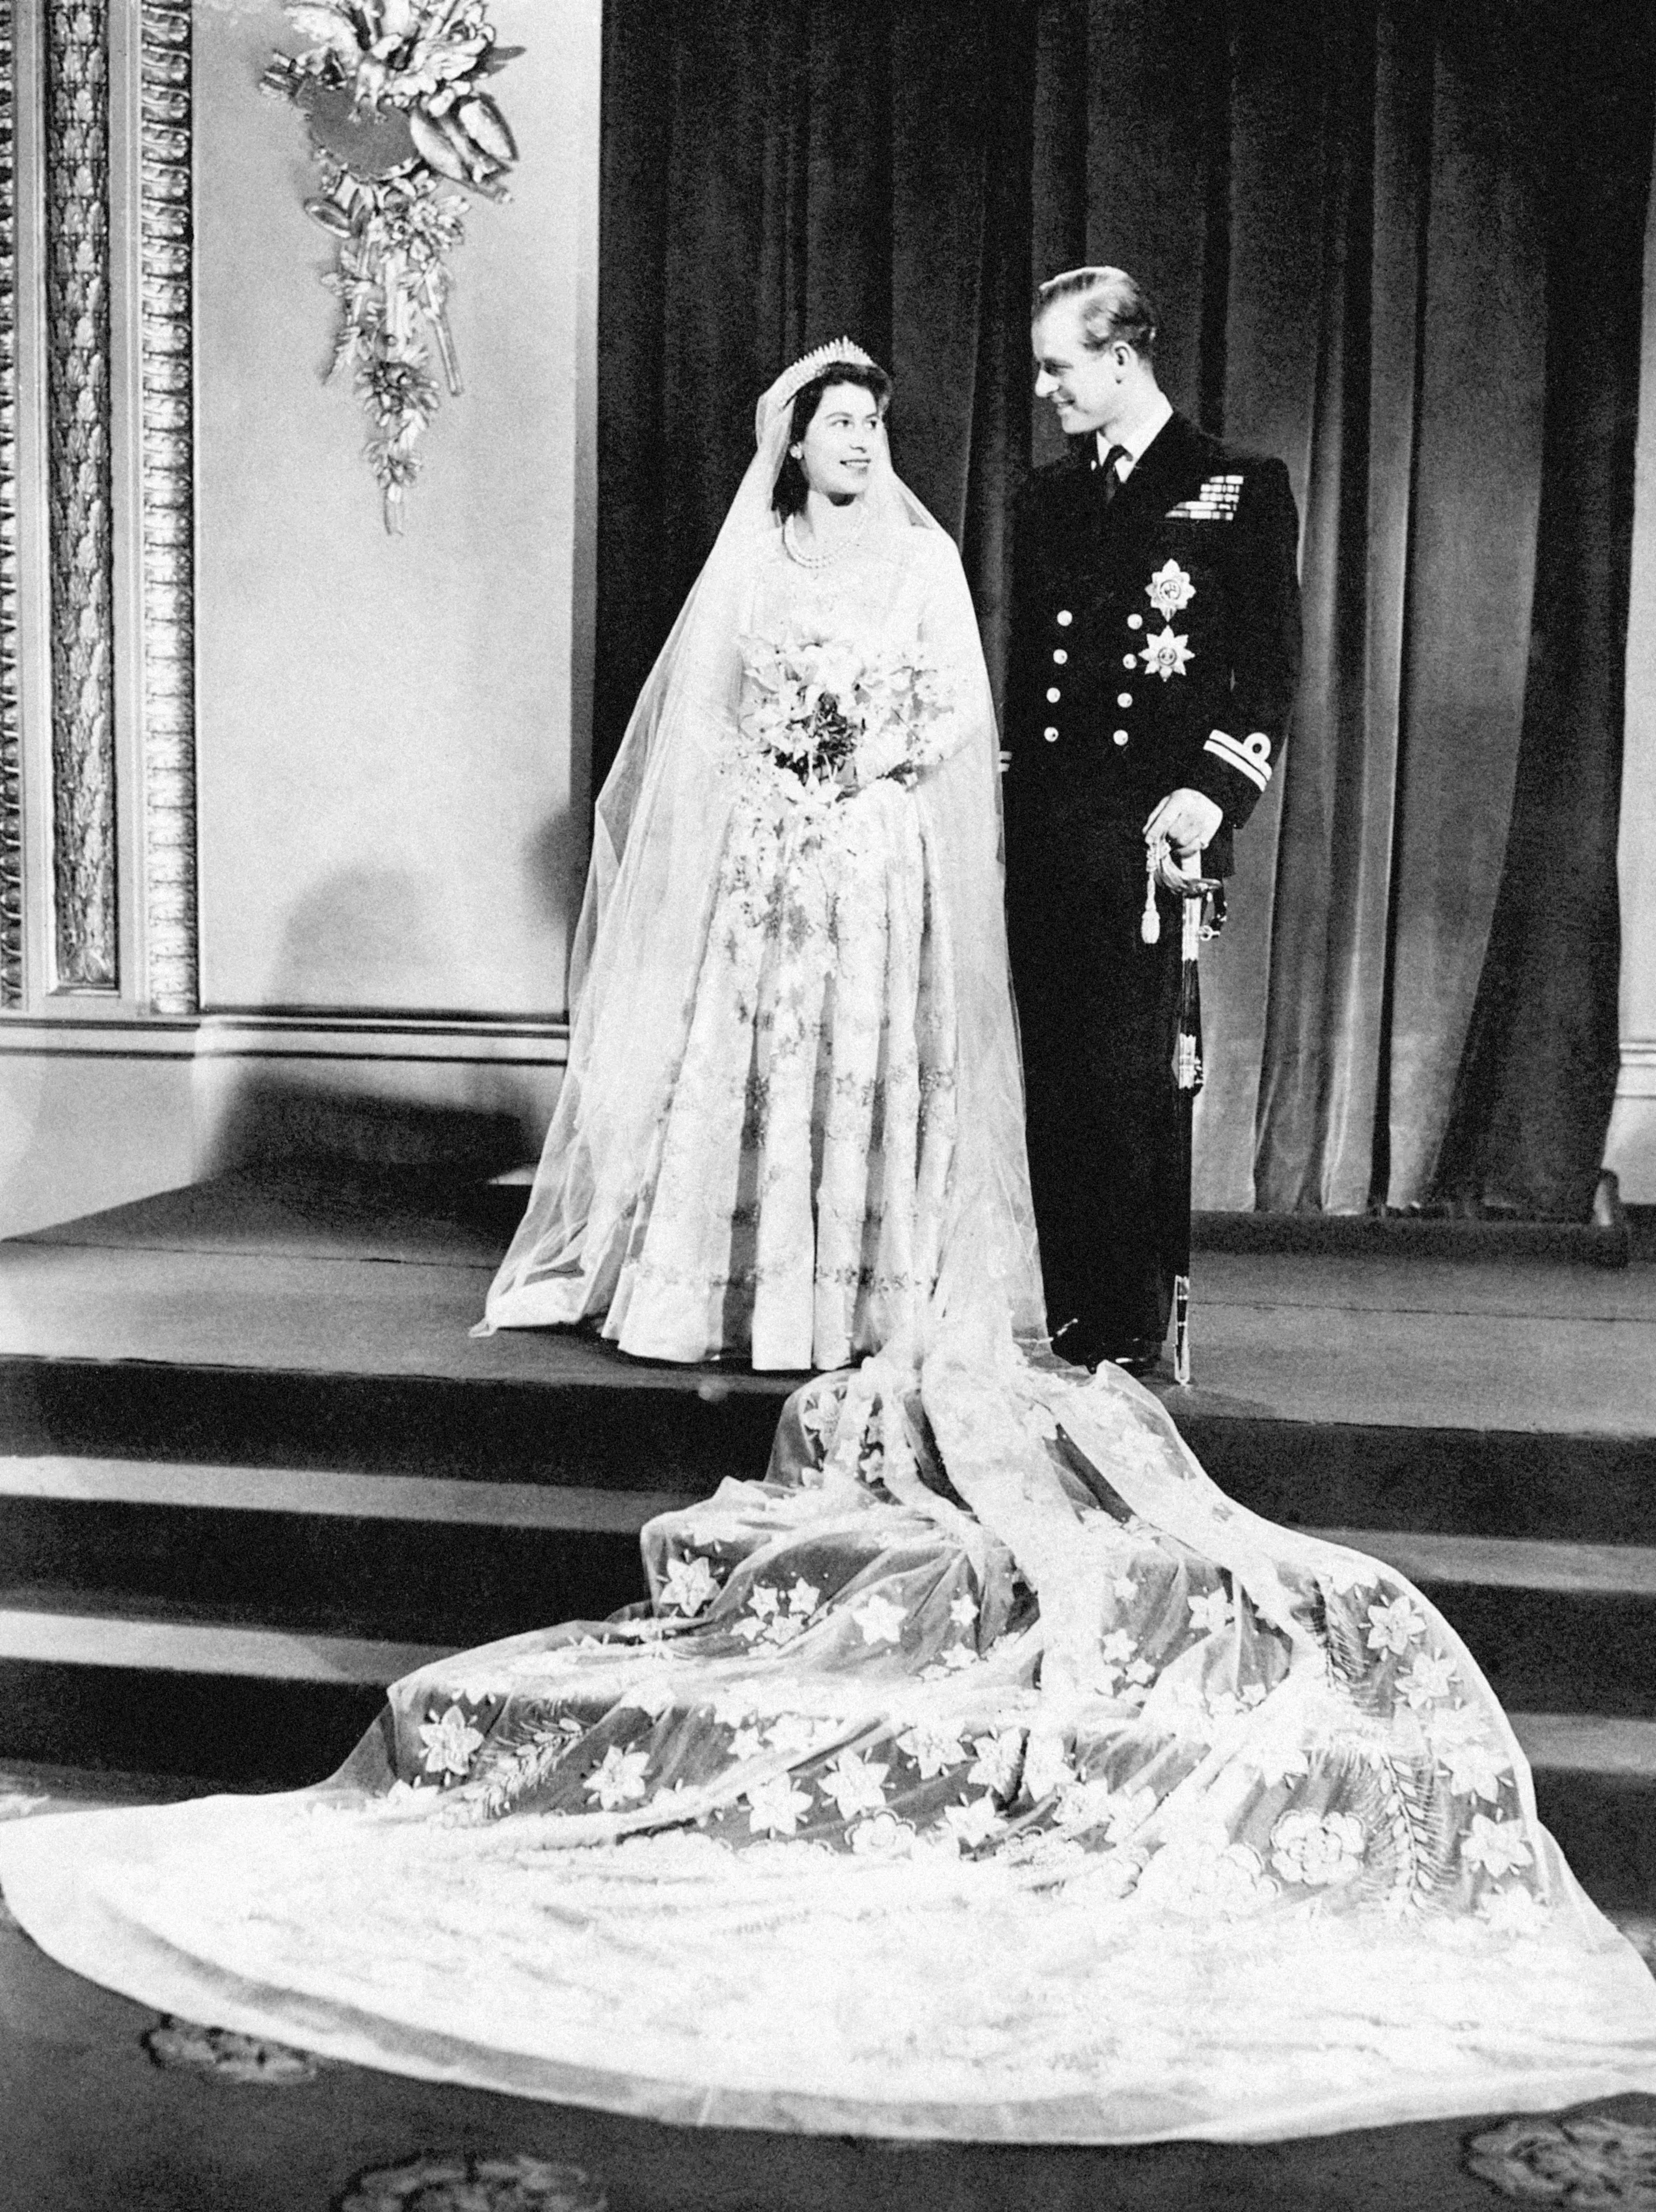 Philip married the Queen - then Princess Elizabeth - at Westminster Abbey in 1947 (